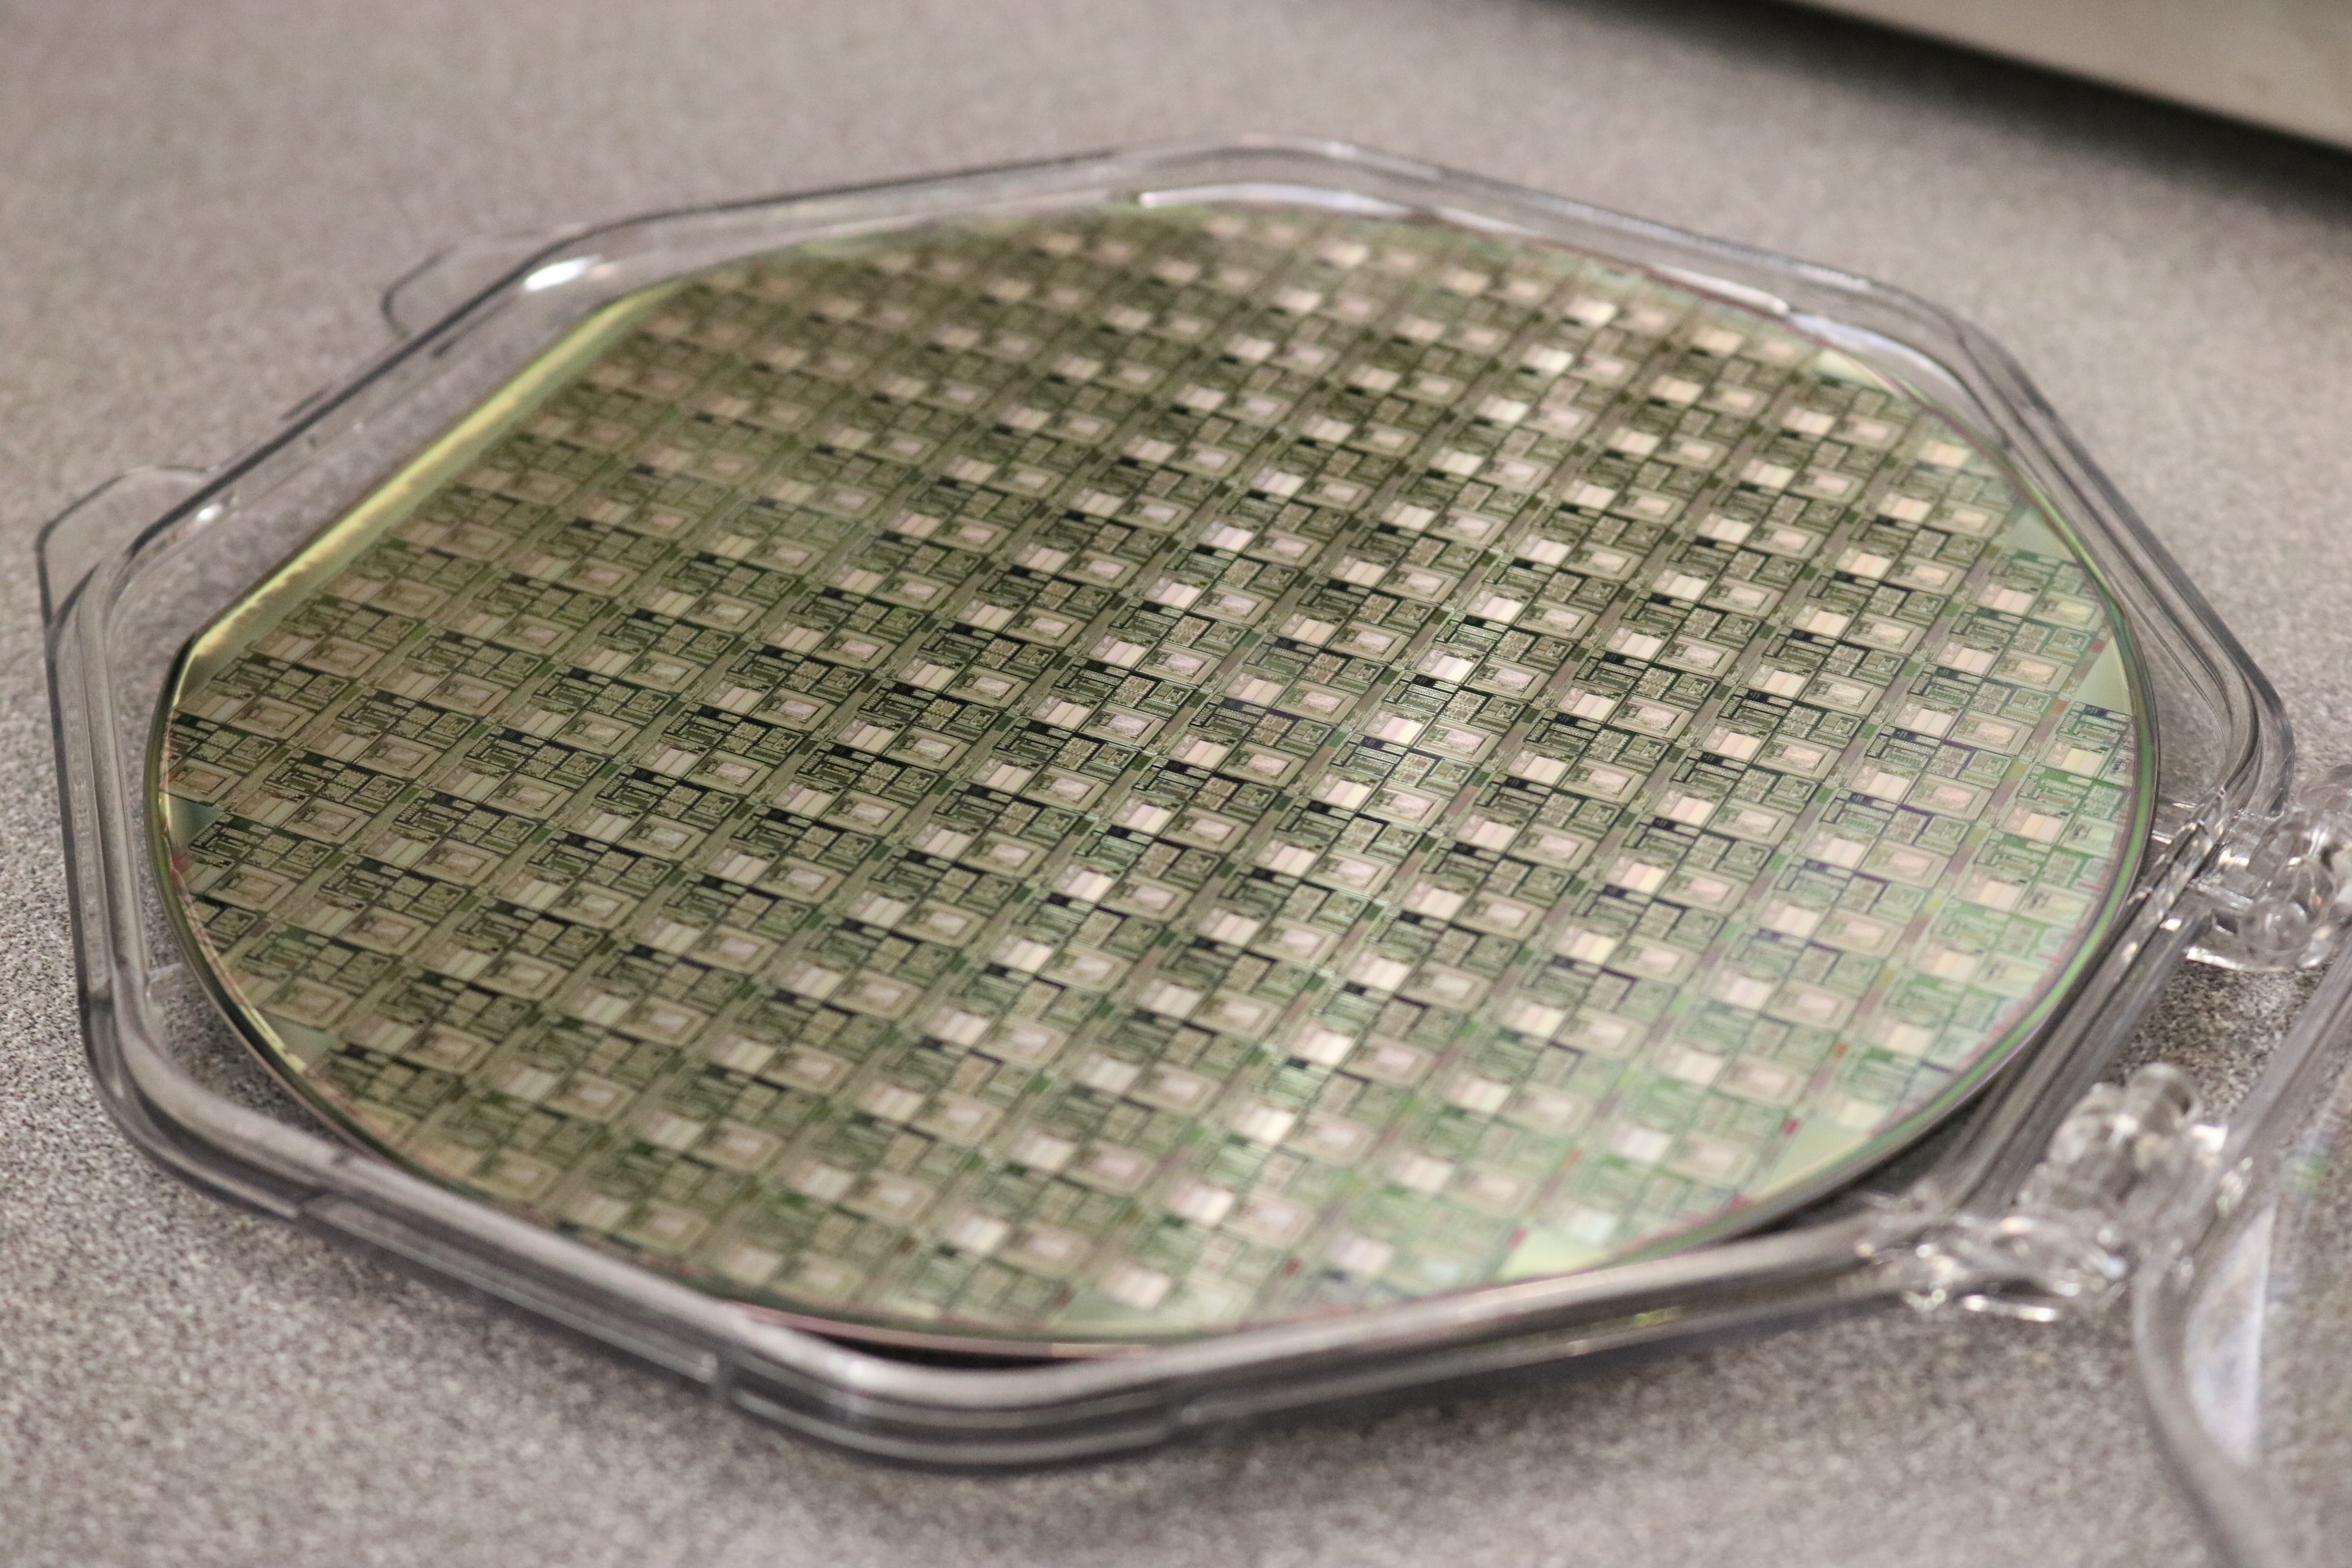 Silicon Wafers | A Slice of Electronic Components